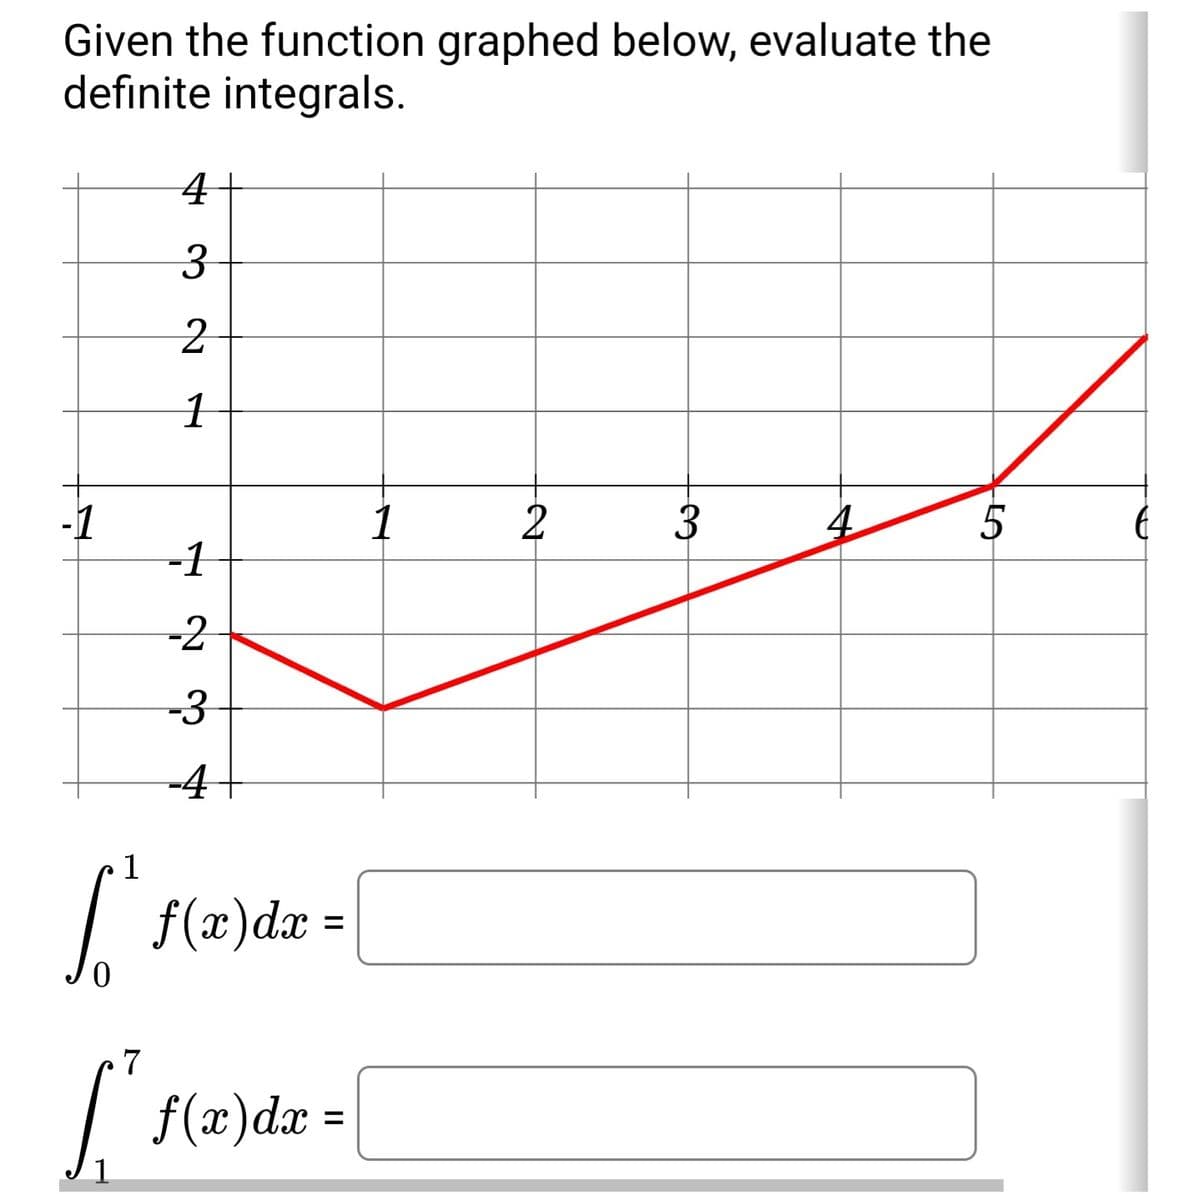 Given the function graphed below, evaluate the
definite integrals.
3.
-1
-1
1
2
3
4
5
-2
-3
-4
1
| f(x)dx =
7
f(x)dx :
%3D
